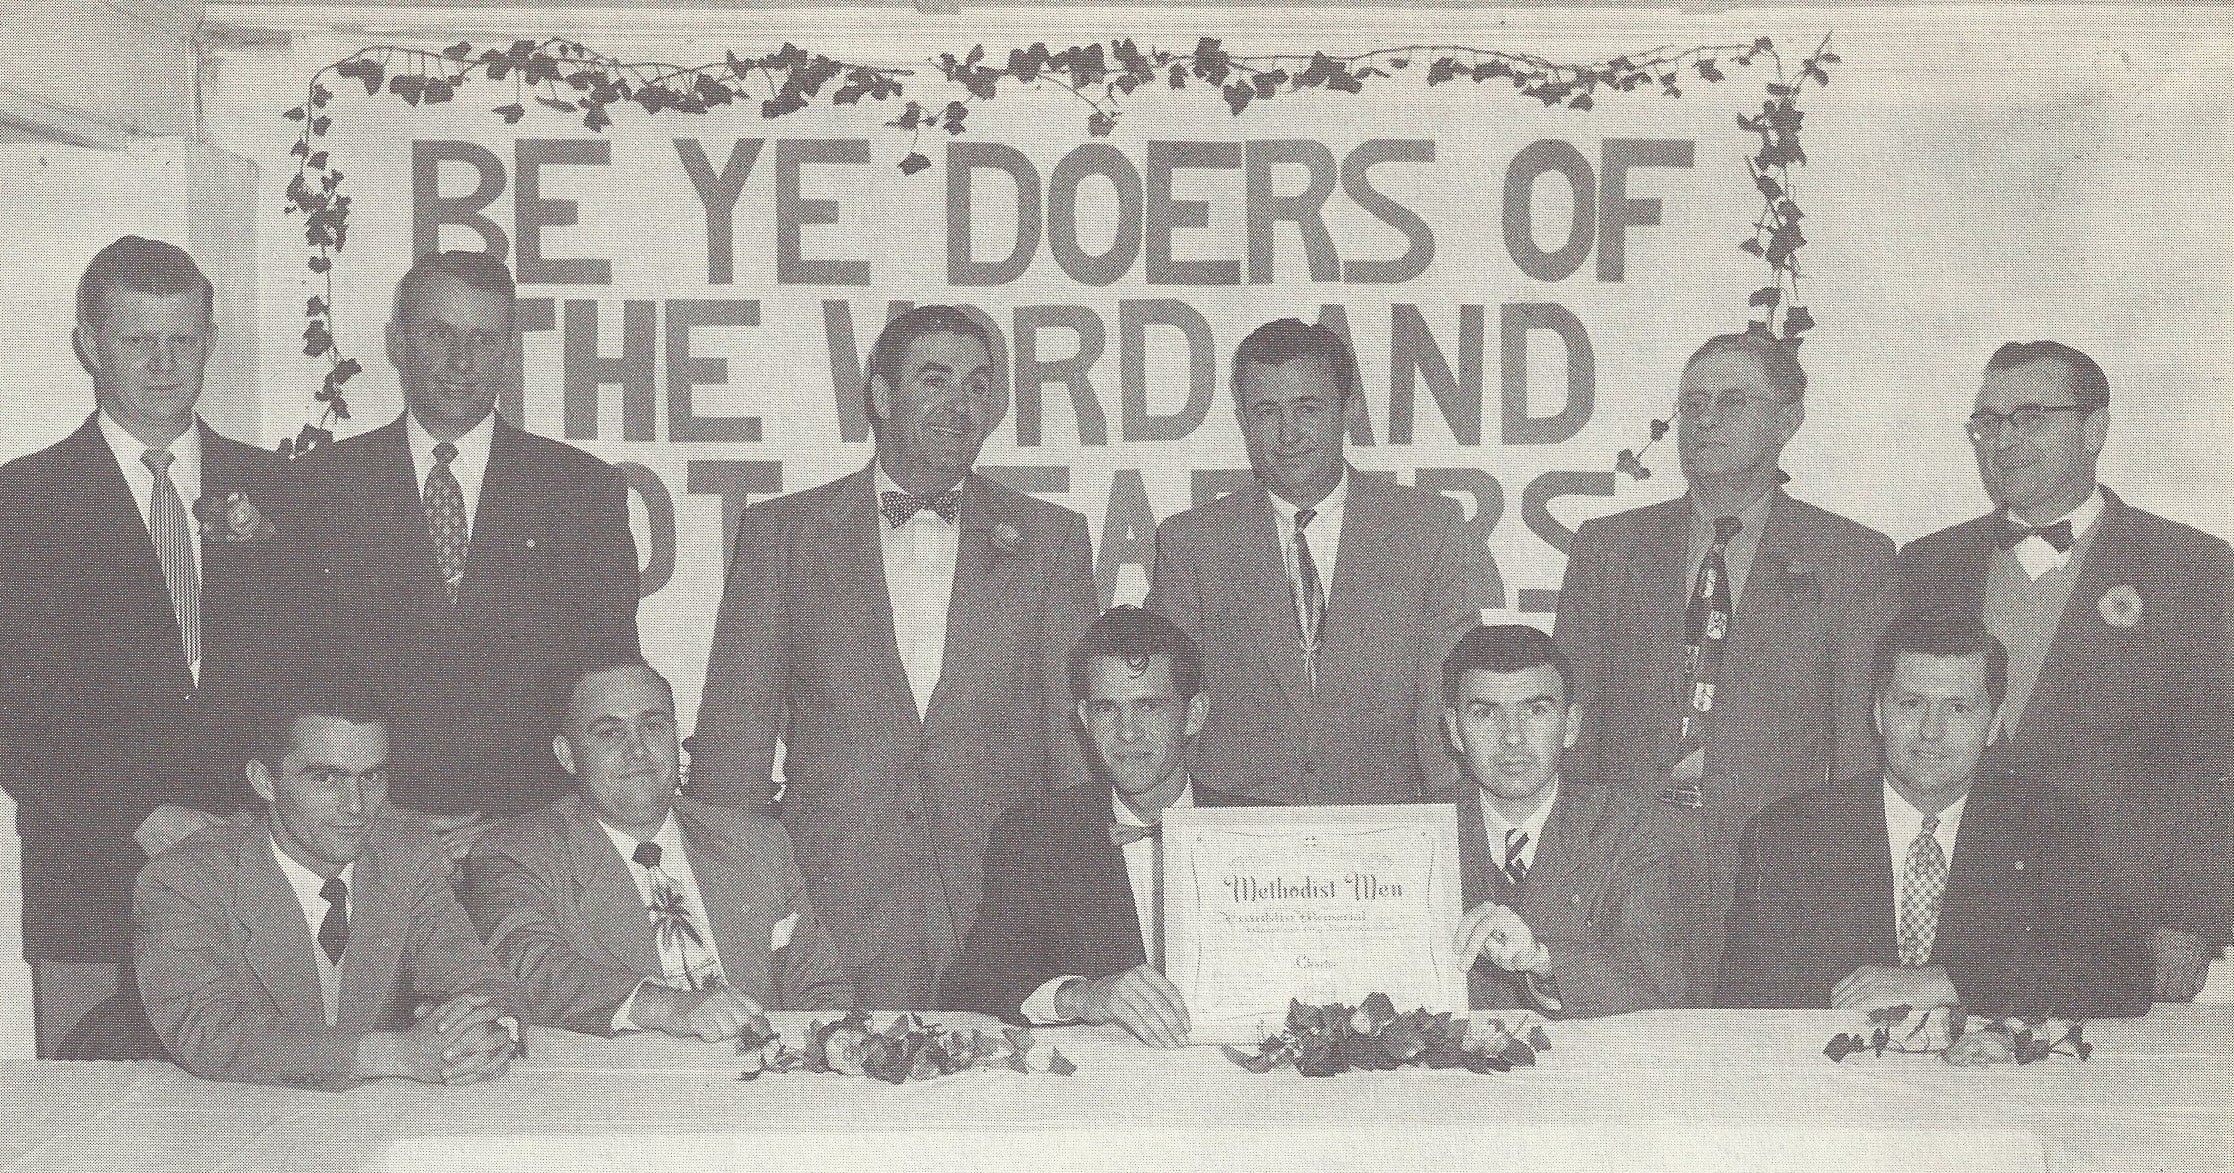 Early 1950_s. Chartering of the Methodist Men_s Club.